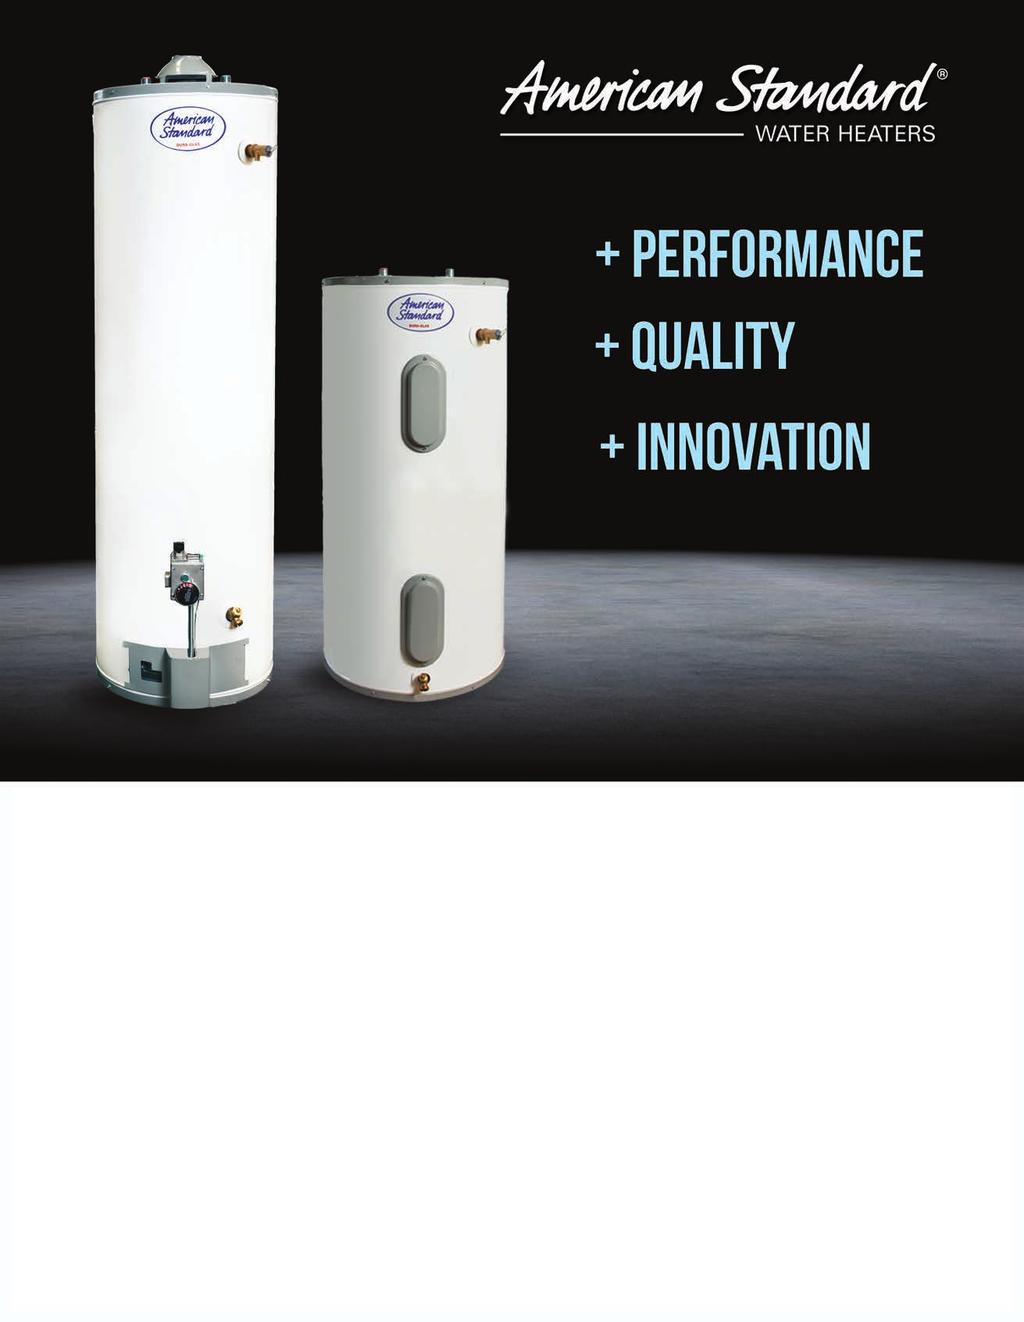 Residential Water Heaters With the new NAECA regulation having taken affect on April 16th, 2015, American Standard Water Heaters is dedicated to supporting all customers during this transition.